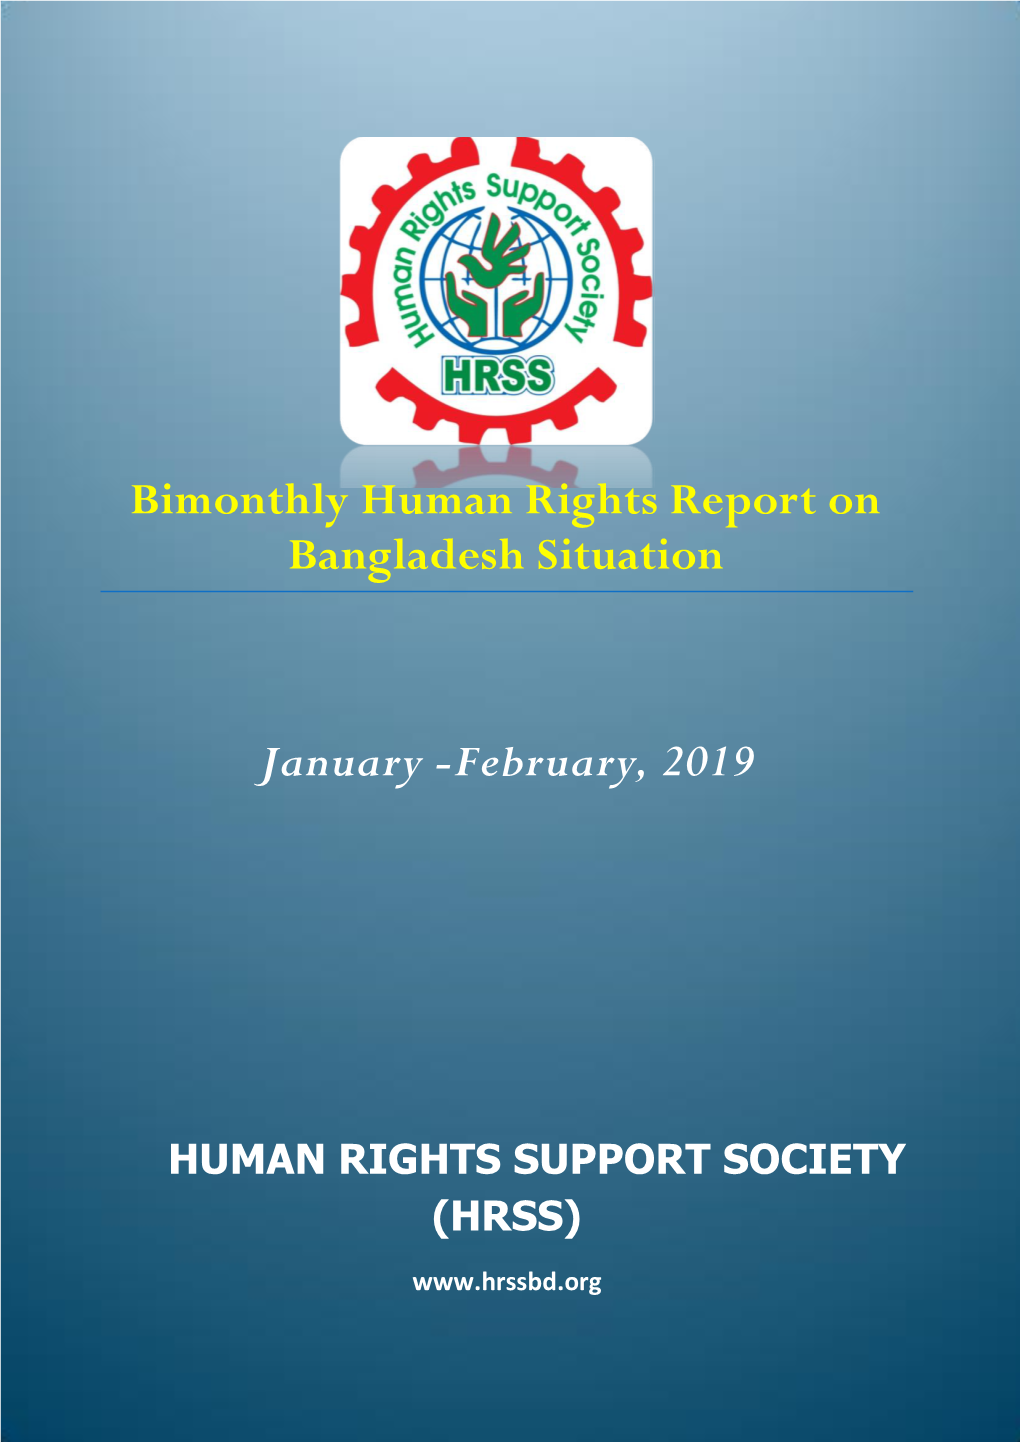 Bimonthly Human Rights Report on Bangladesh Situation